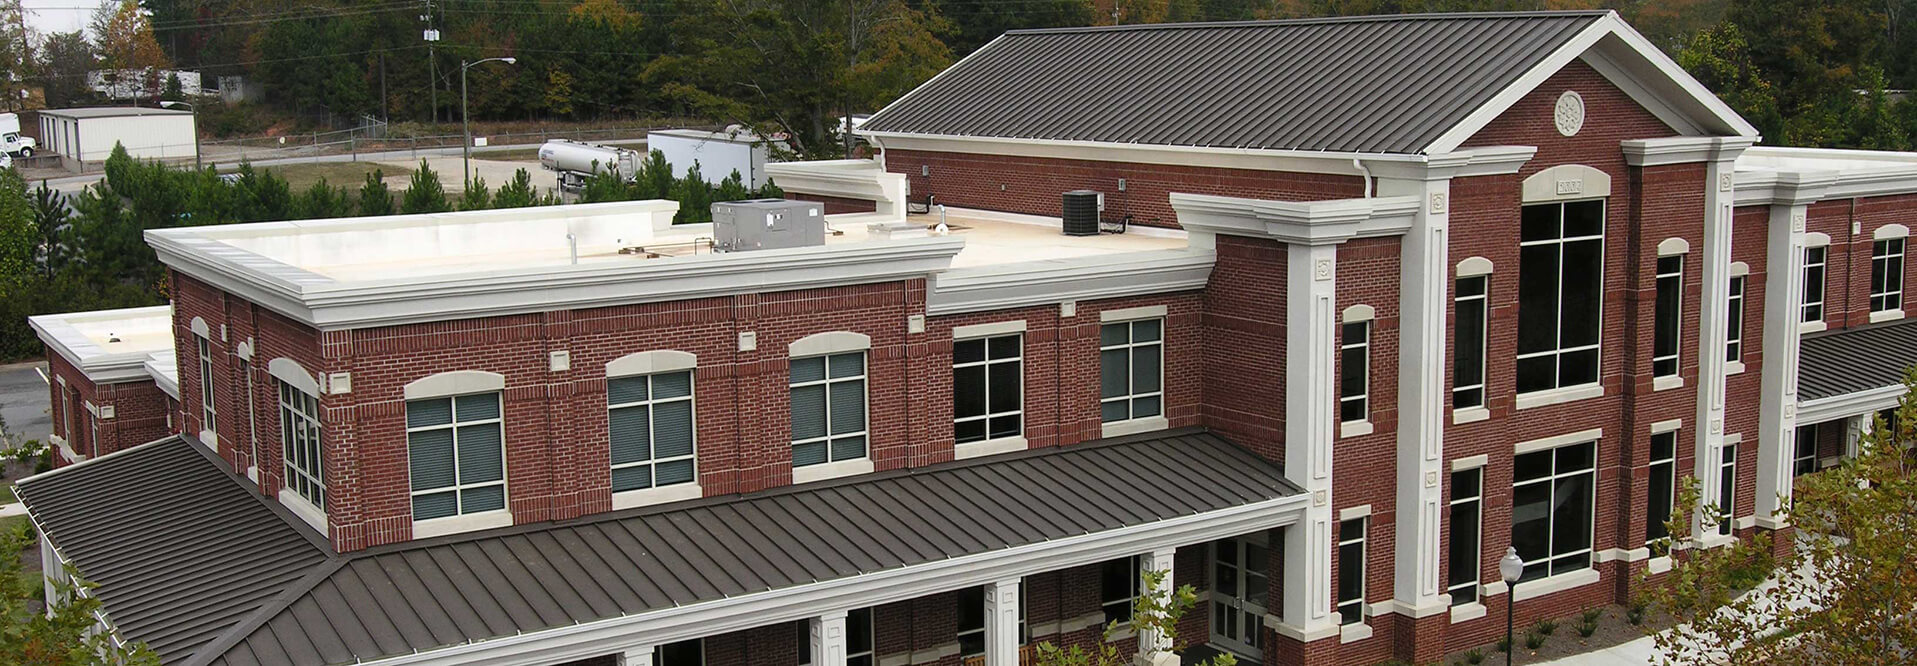 boston roofers commercial roofing installation